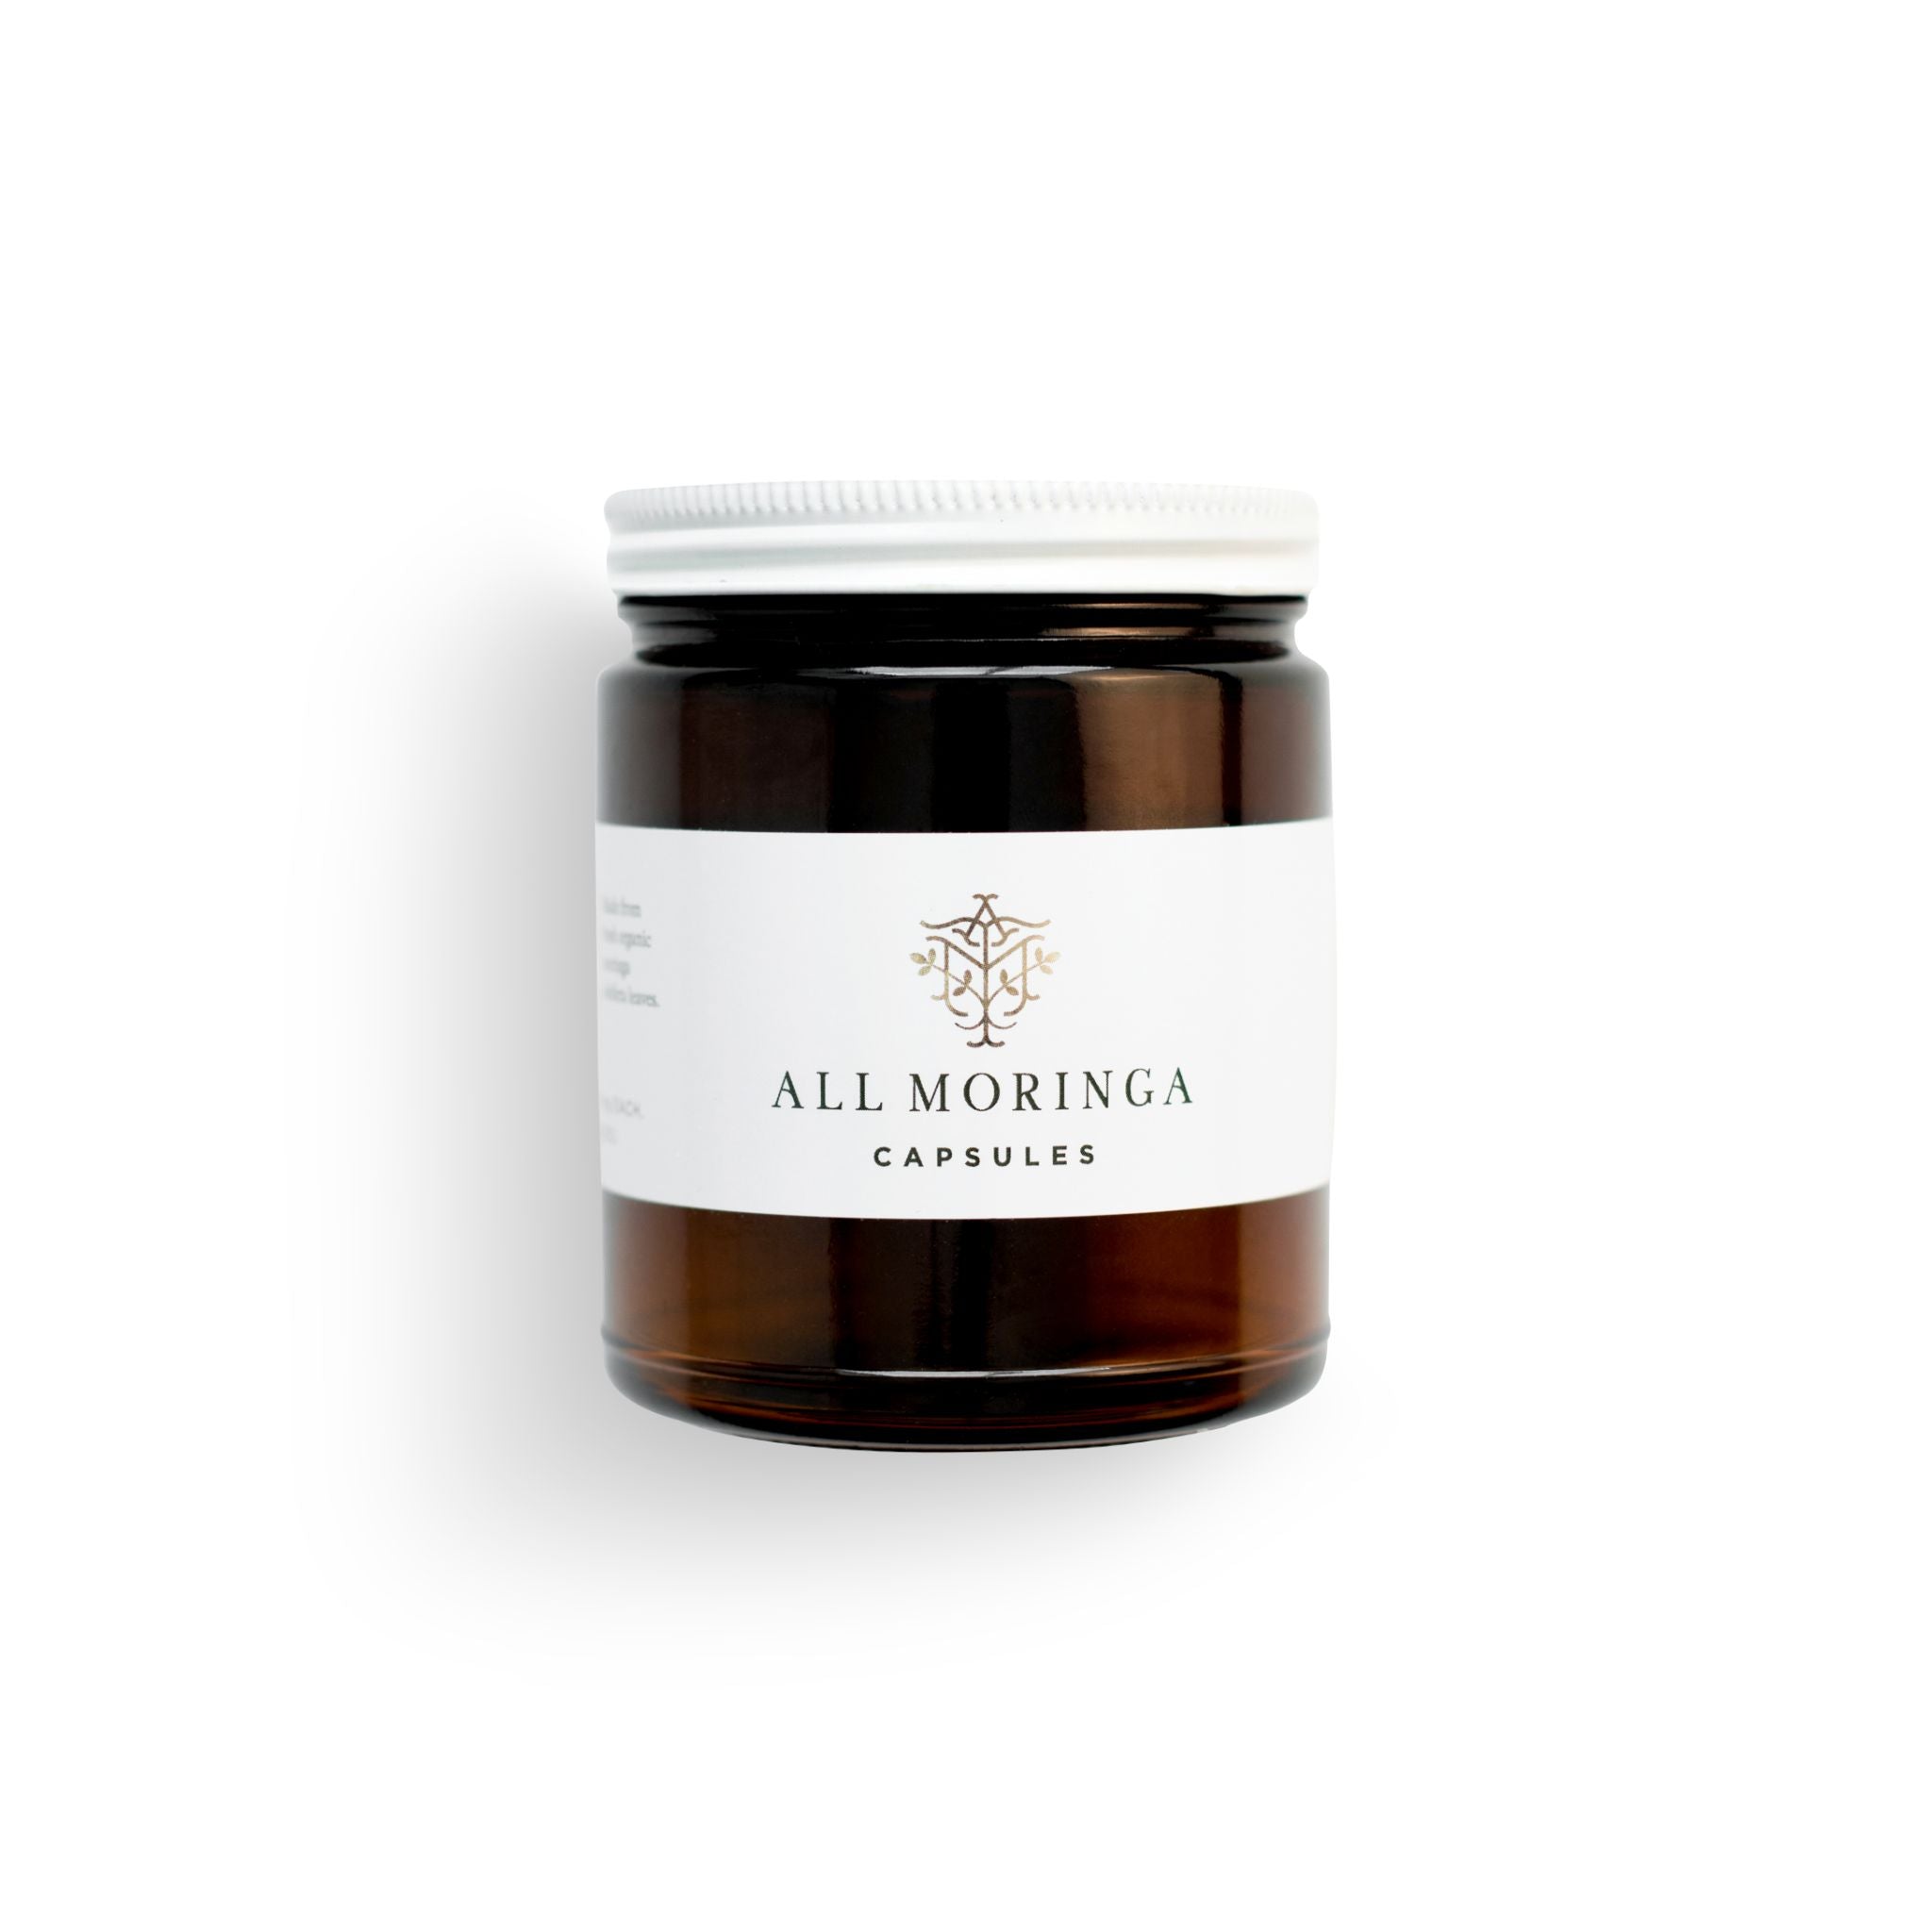 Superfood organic moringa leaves capsules in a glass jar and a metal cup